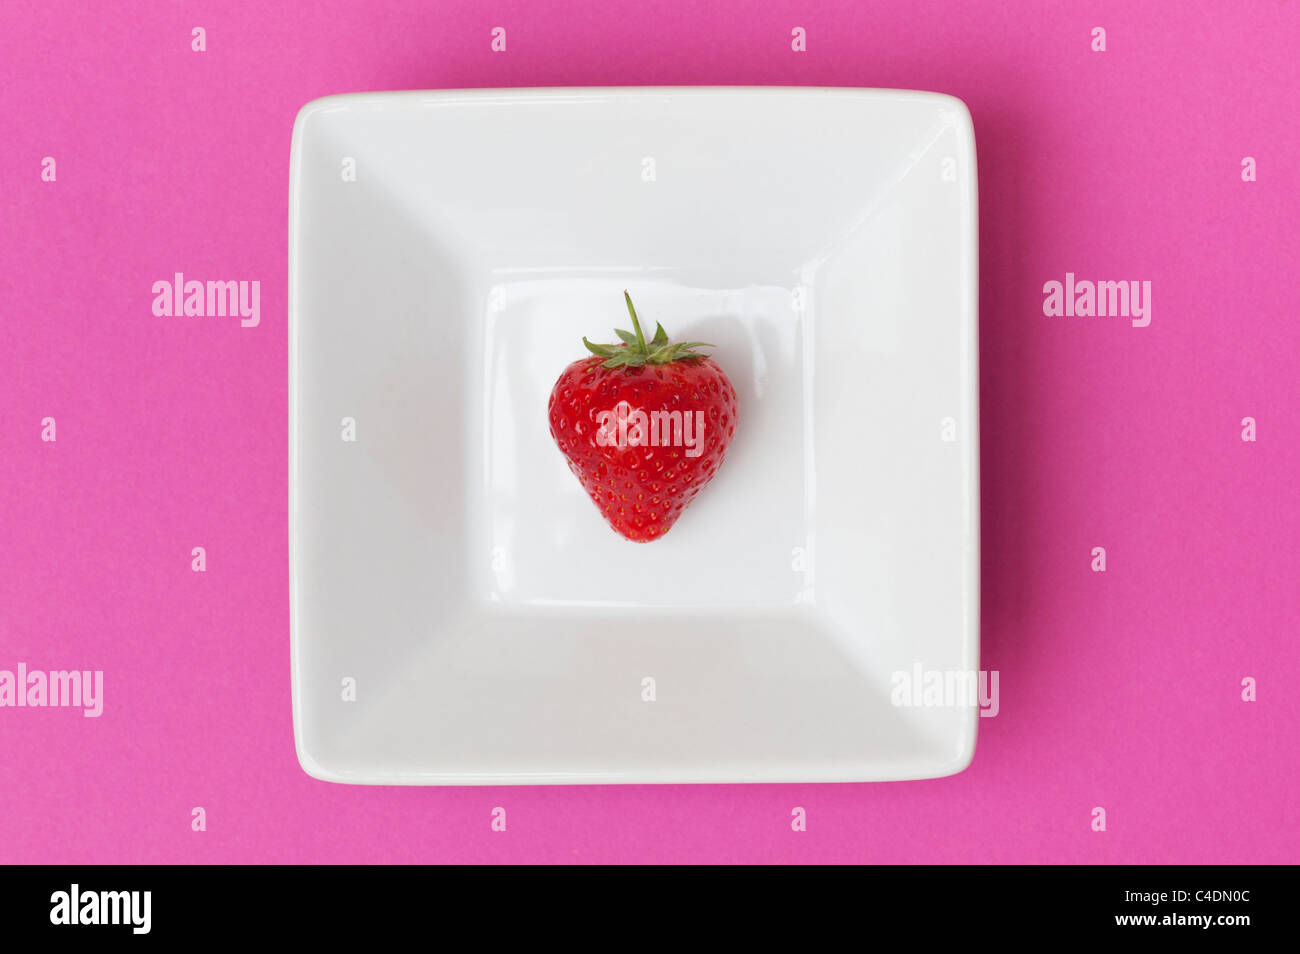 Strawberry in a square ceramic dish on a pink background Stock Photo